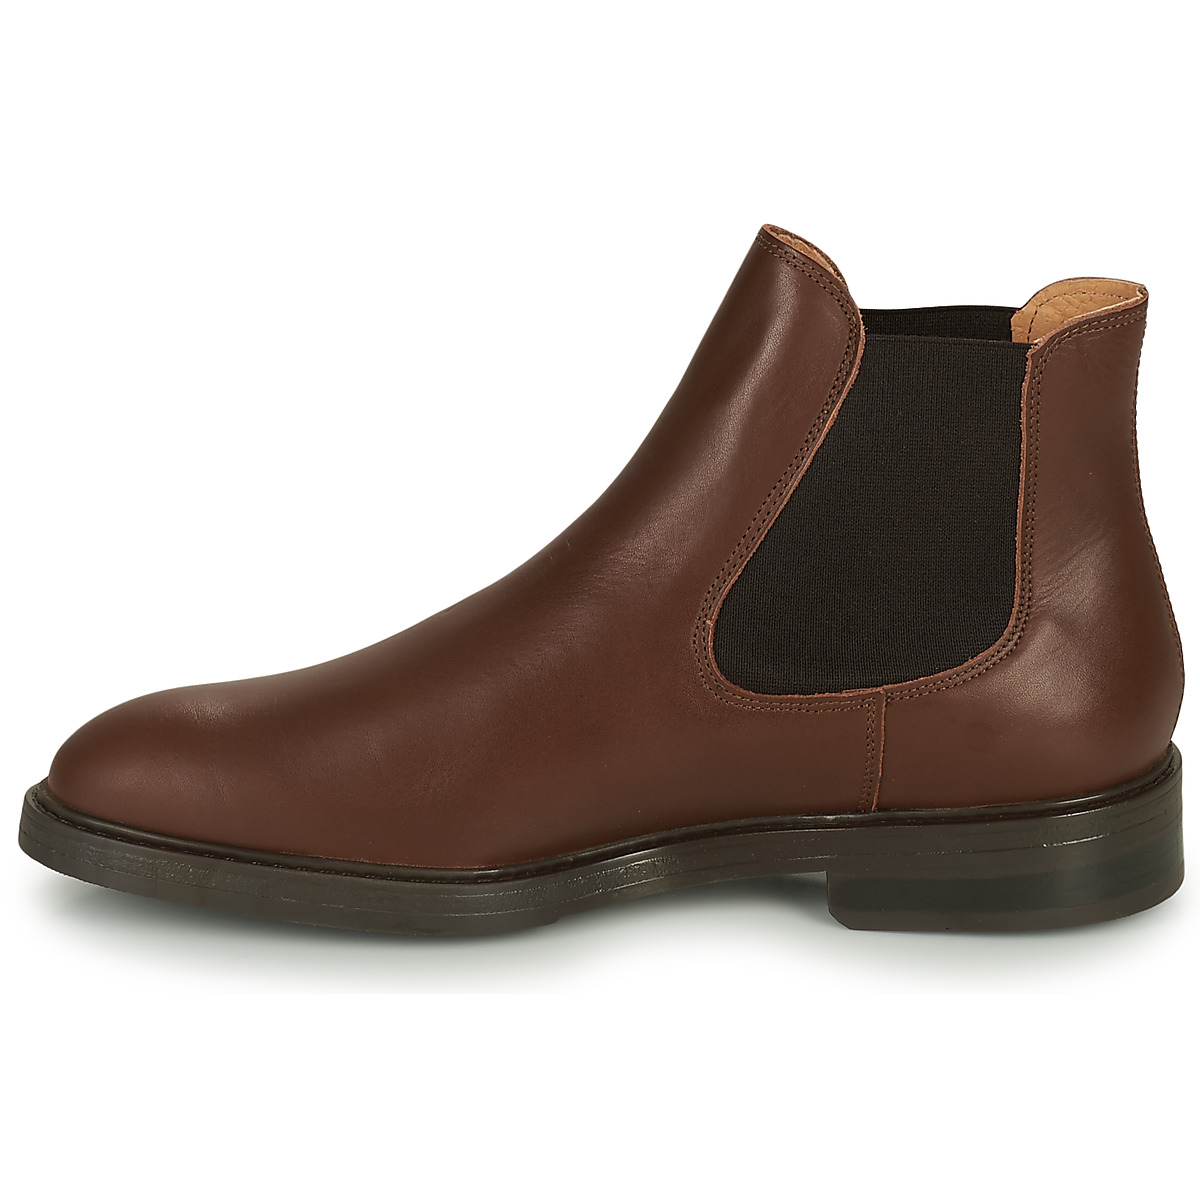 Selected Marron SLHBLAKE LEATHER CHELSEA BOOT UBMzQLfh